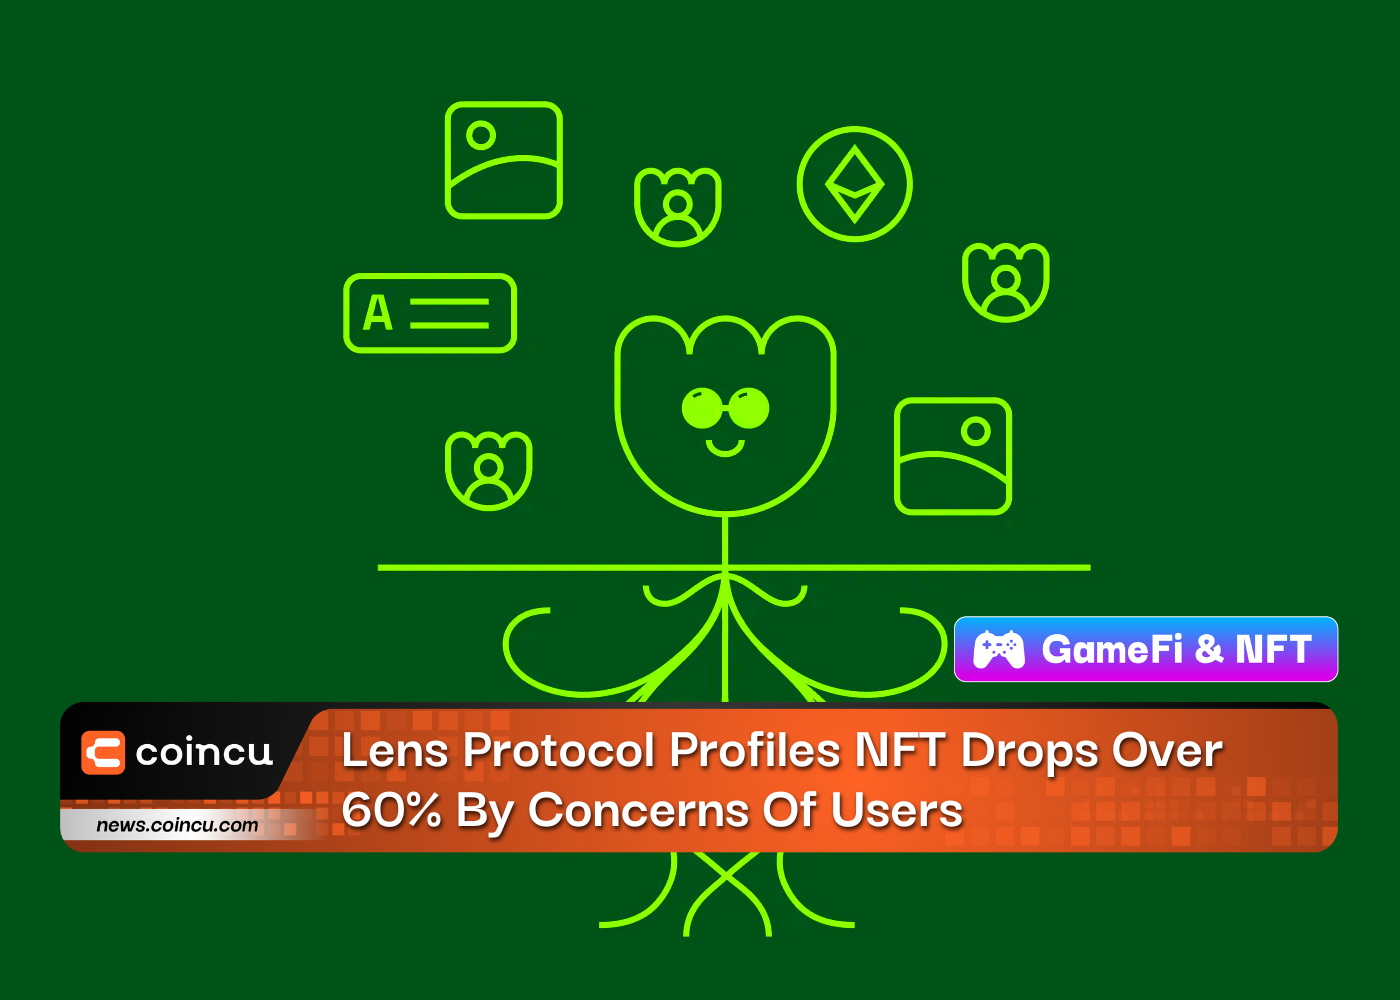 Lens Protocol Profiles NFT Drops Over 60% By Concerns Of Users